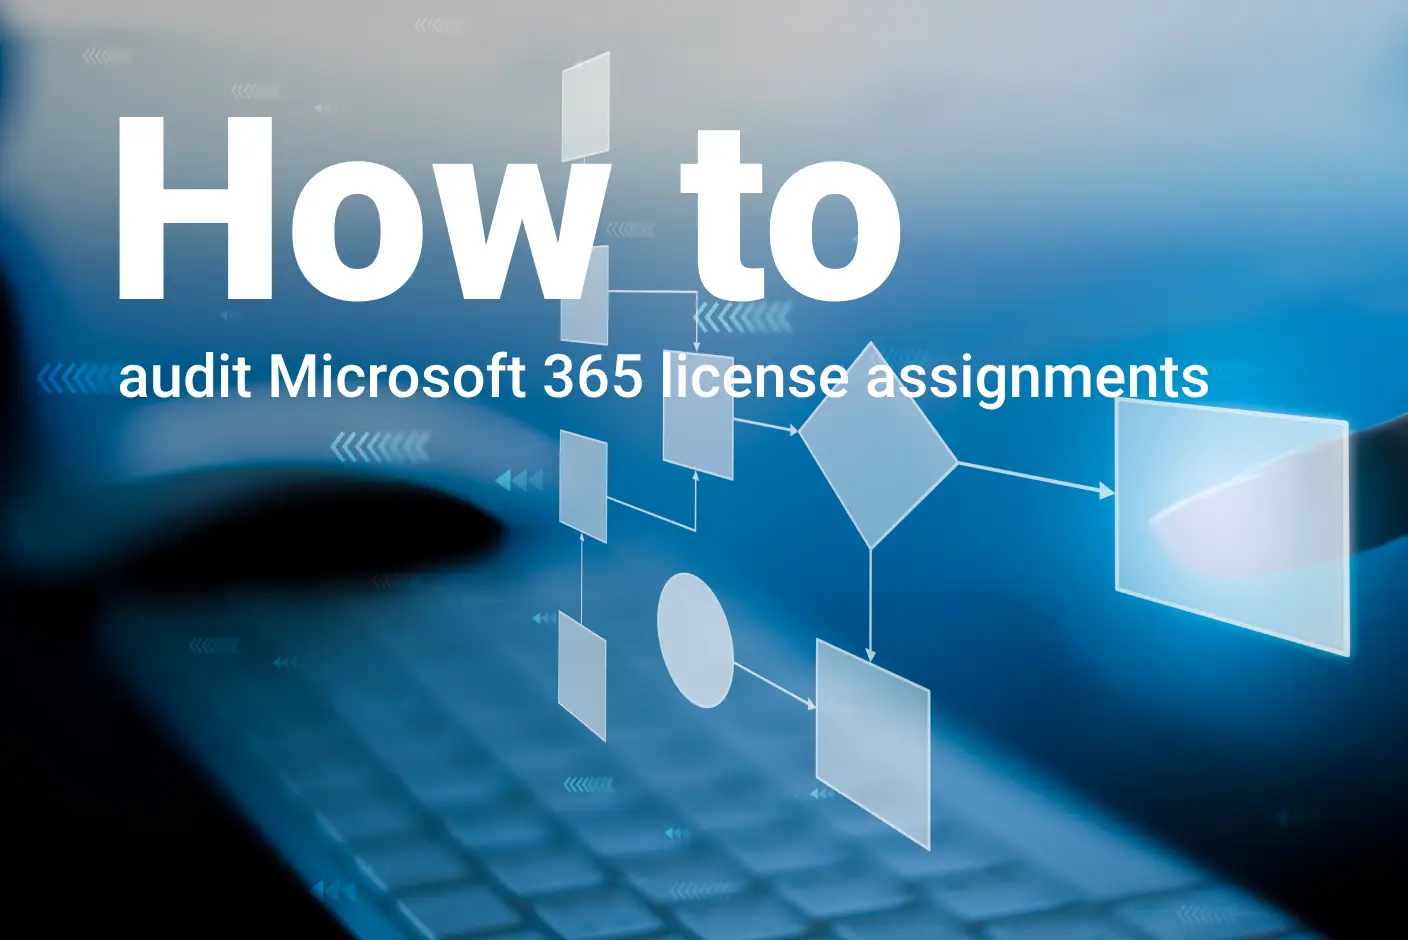 How to audit Microsoft office 365 license assignments